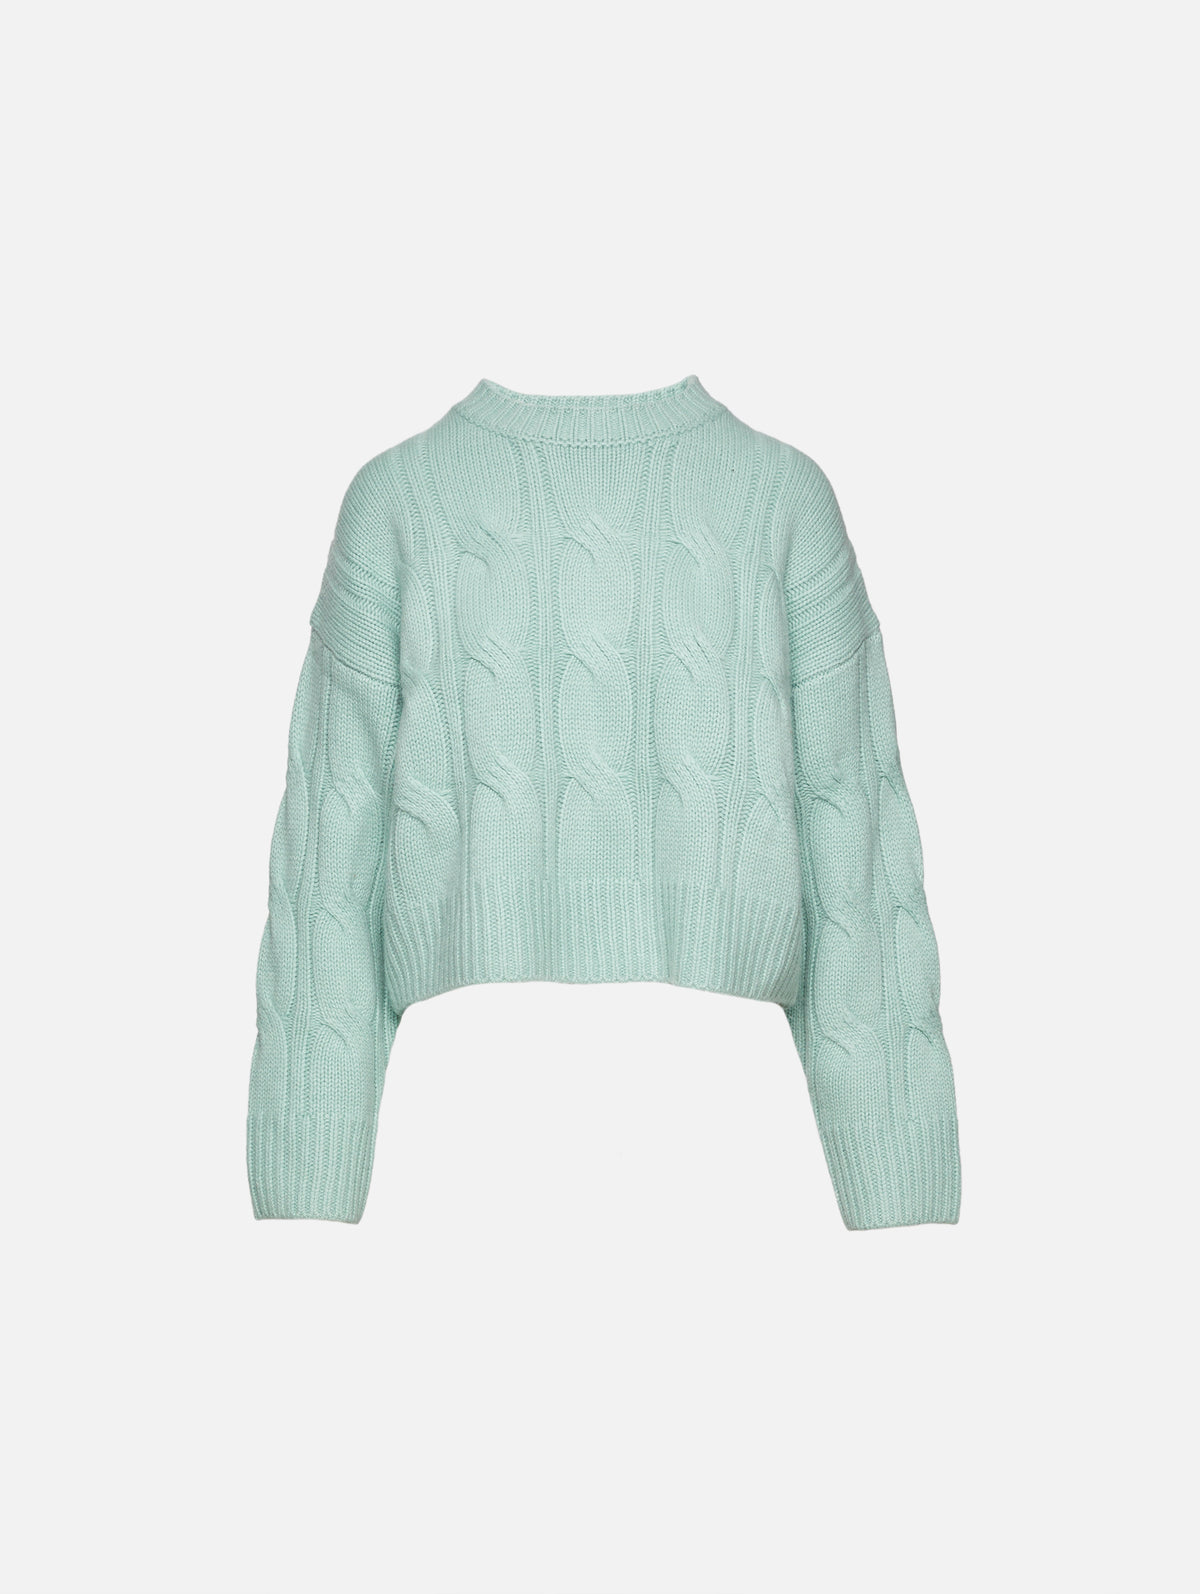 view 4 - Tristan Cable Knit Sweater